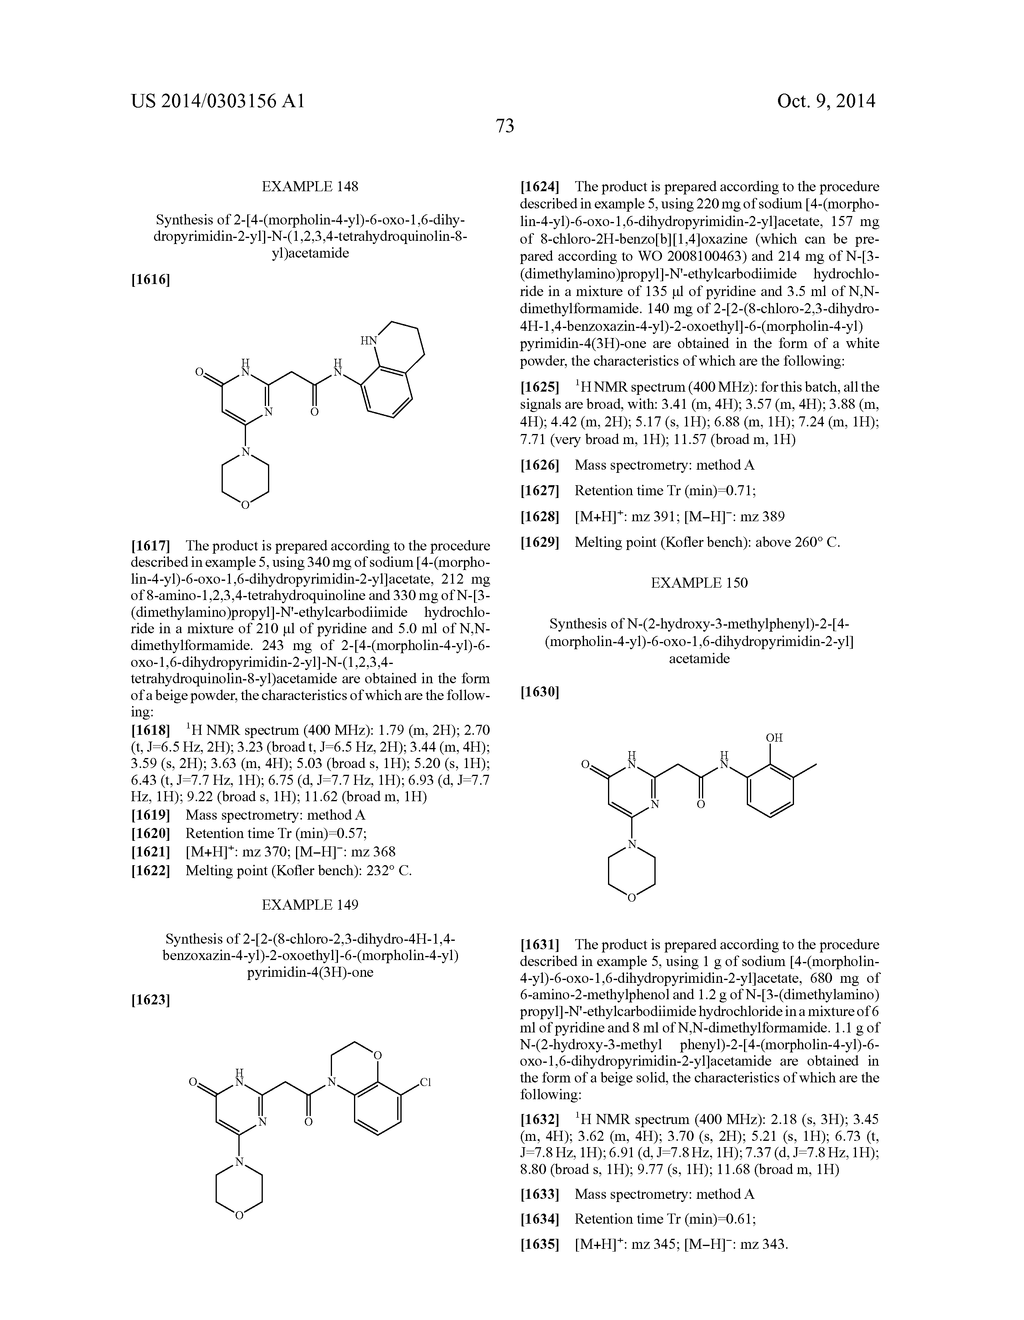 NOVEL (6-OXO-1,6-DIHYDROPYRIMIDIN-2-YL)AMIDE DERIVATIVES, PREPARATION     THEREOF AND PHARMACEUTICAL USE THEREOF AS AKT(PKB) PHOSPHORYLATION     INHIBITORS - diagram, schematic, and image 74